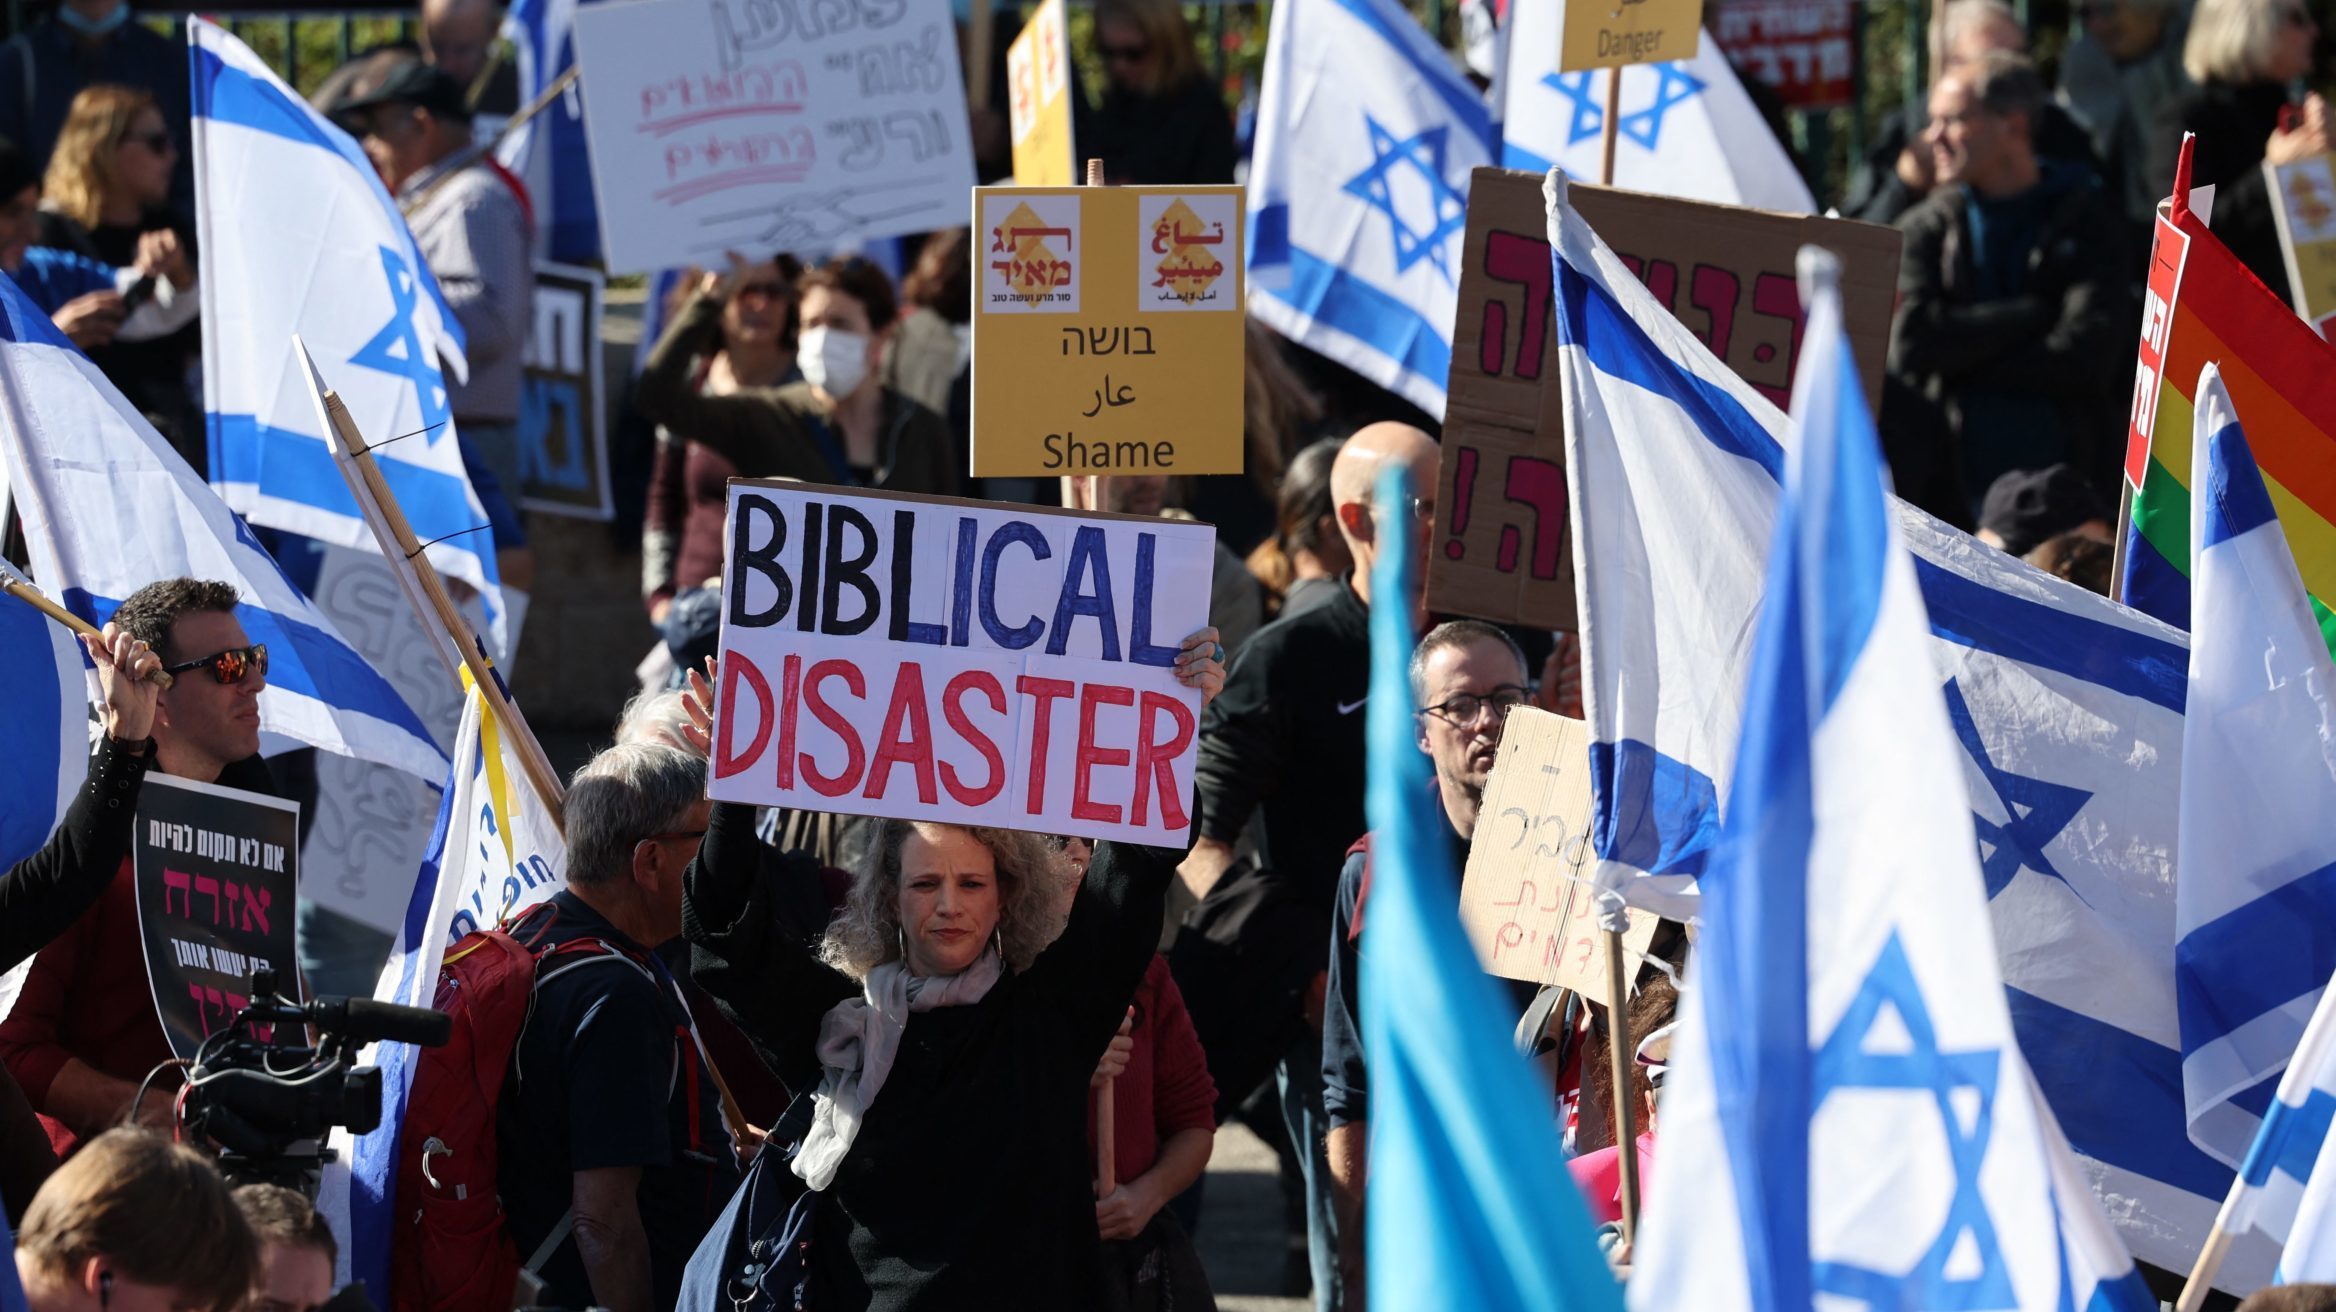 Hundreds Protest Outside Knesset as Israel Swears in New Government